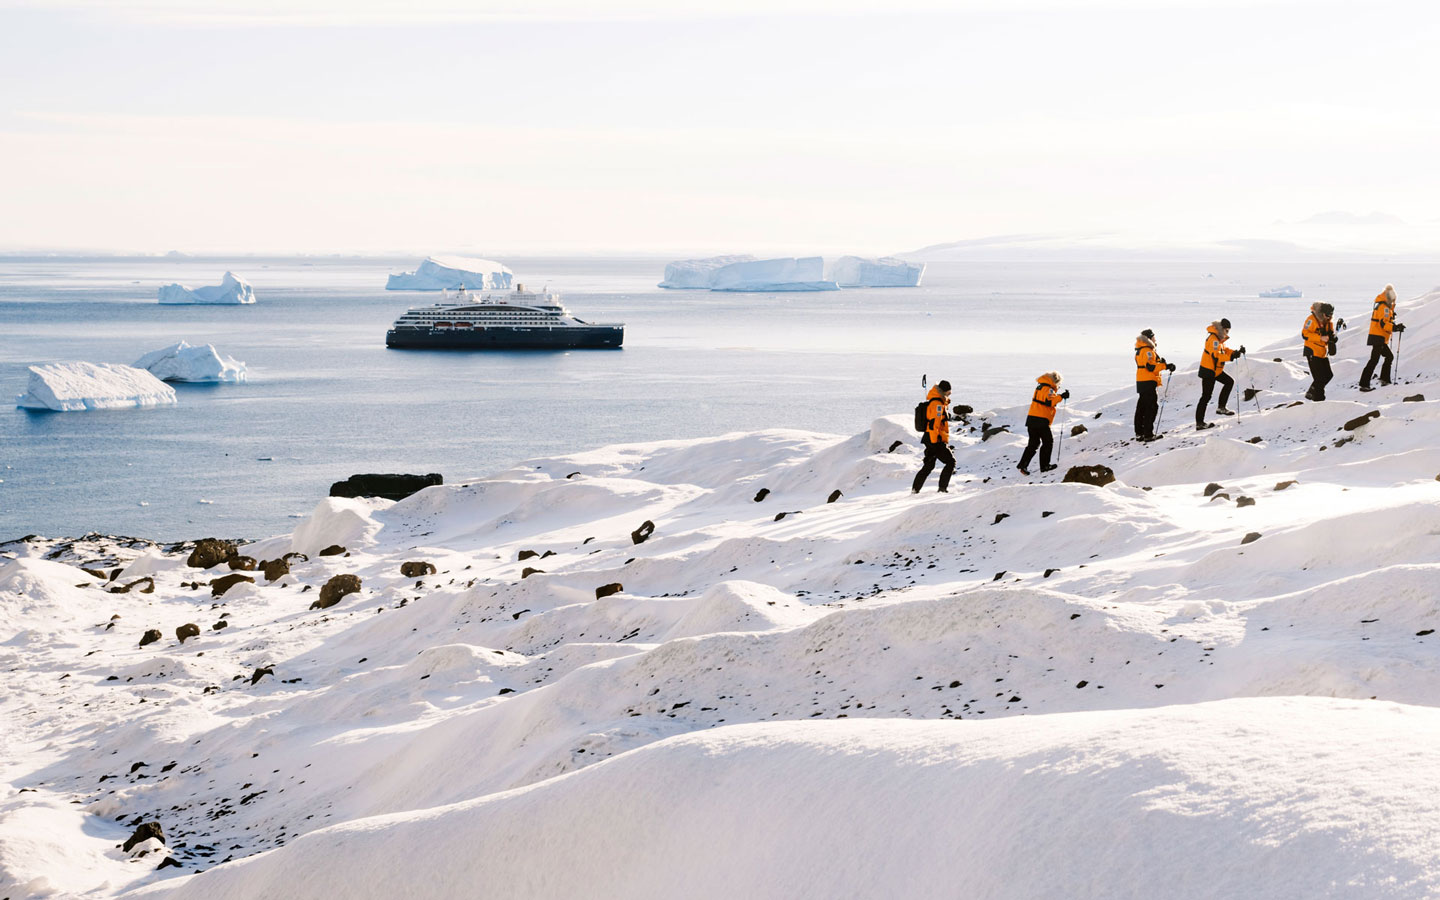 Line of polar travelers in orange coats hikes up snowy hillside in Antarctica as small ship with blue hull sits in distance.